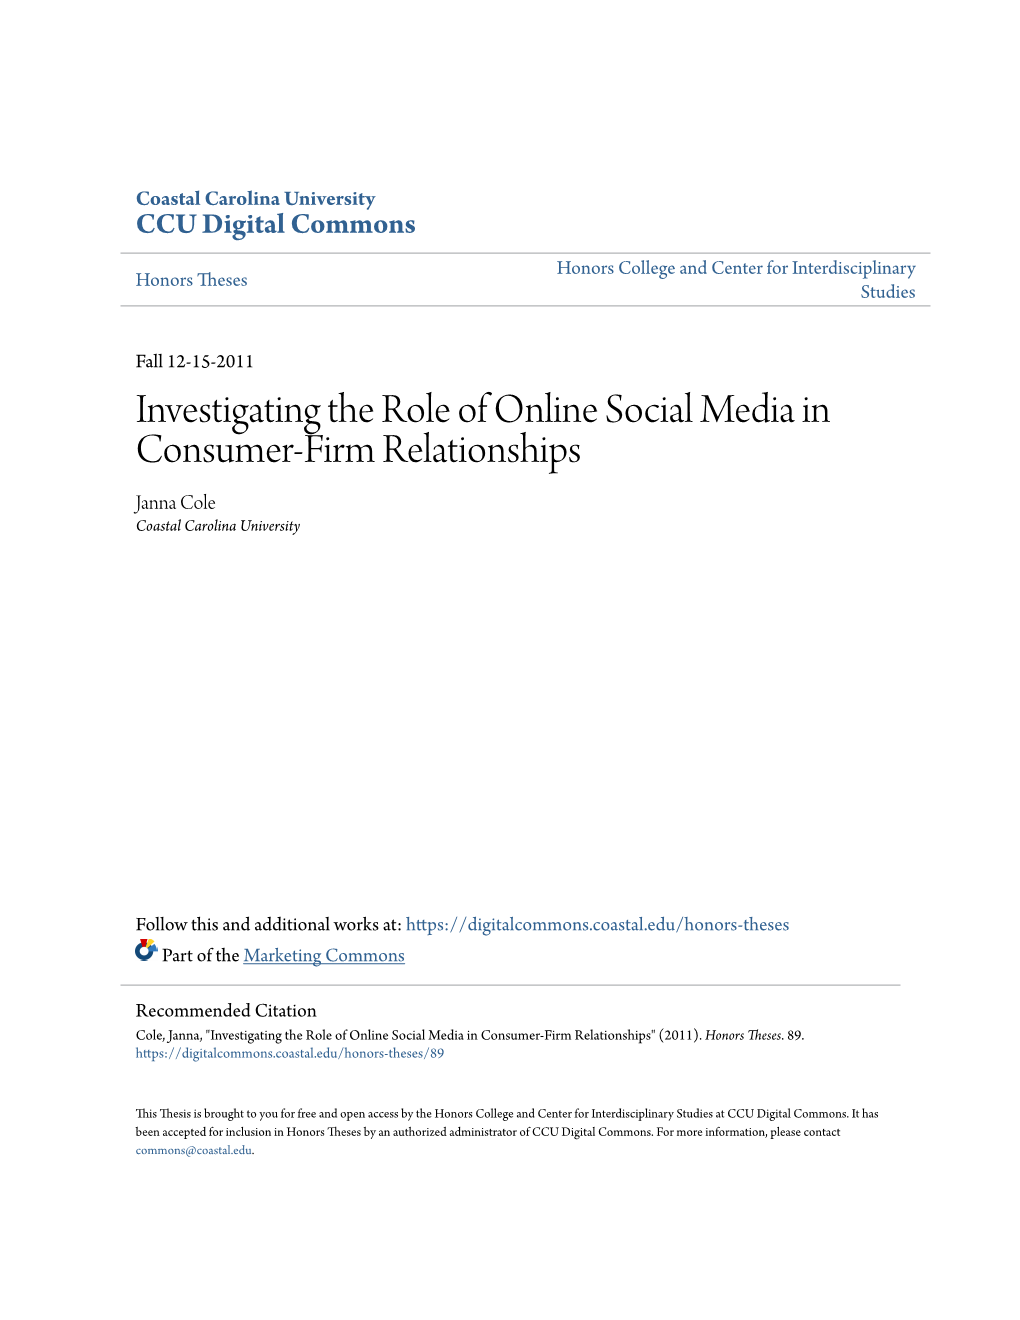 Investigating the Role of Online Social Media in Consumer-Firm Relationships Janna Cole Coastal Carolina University